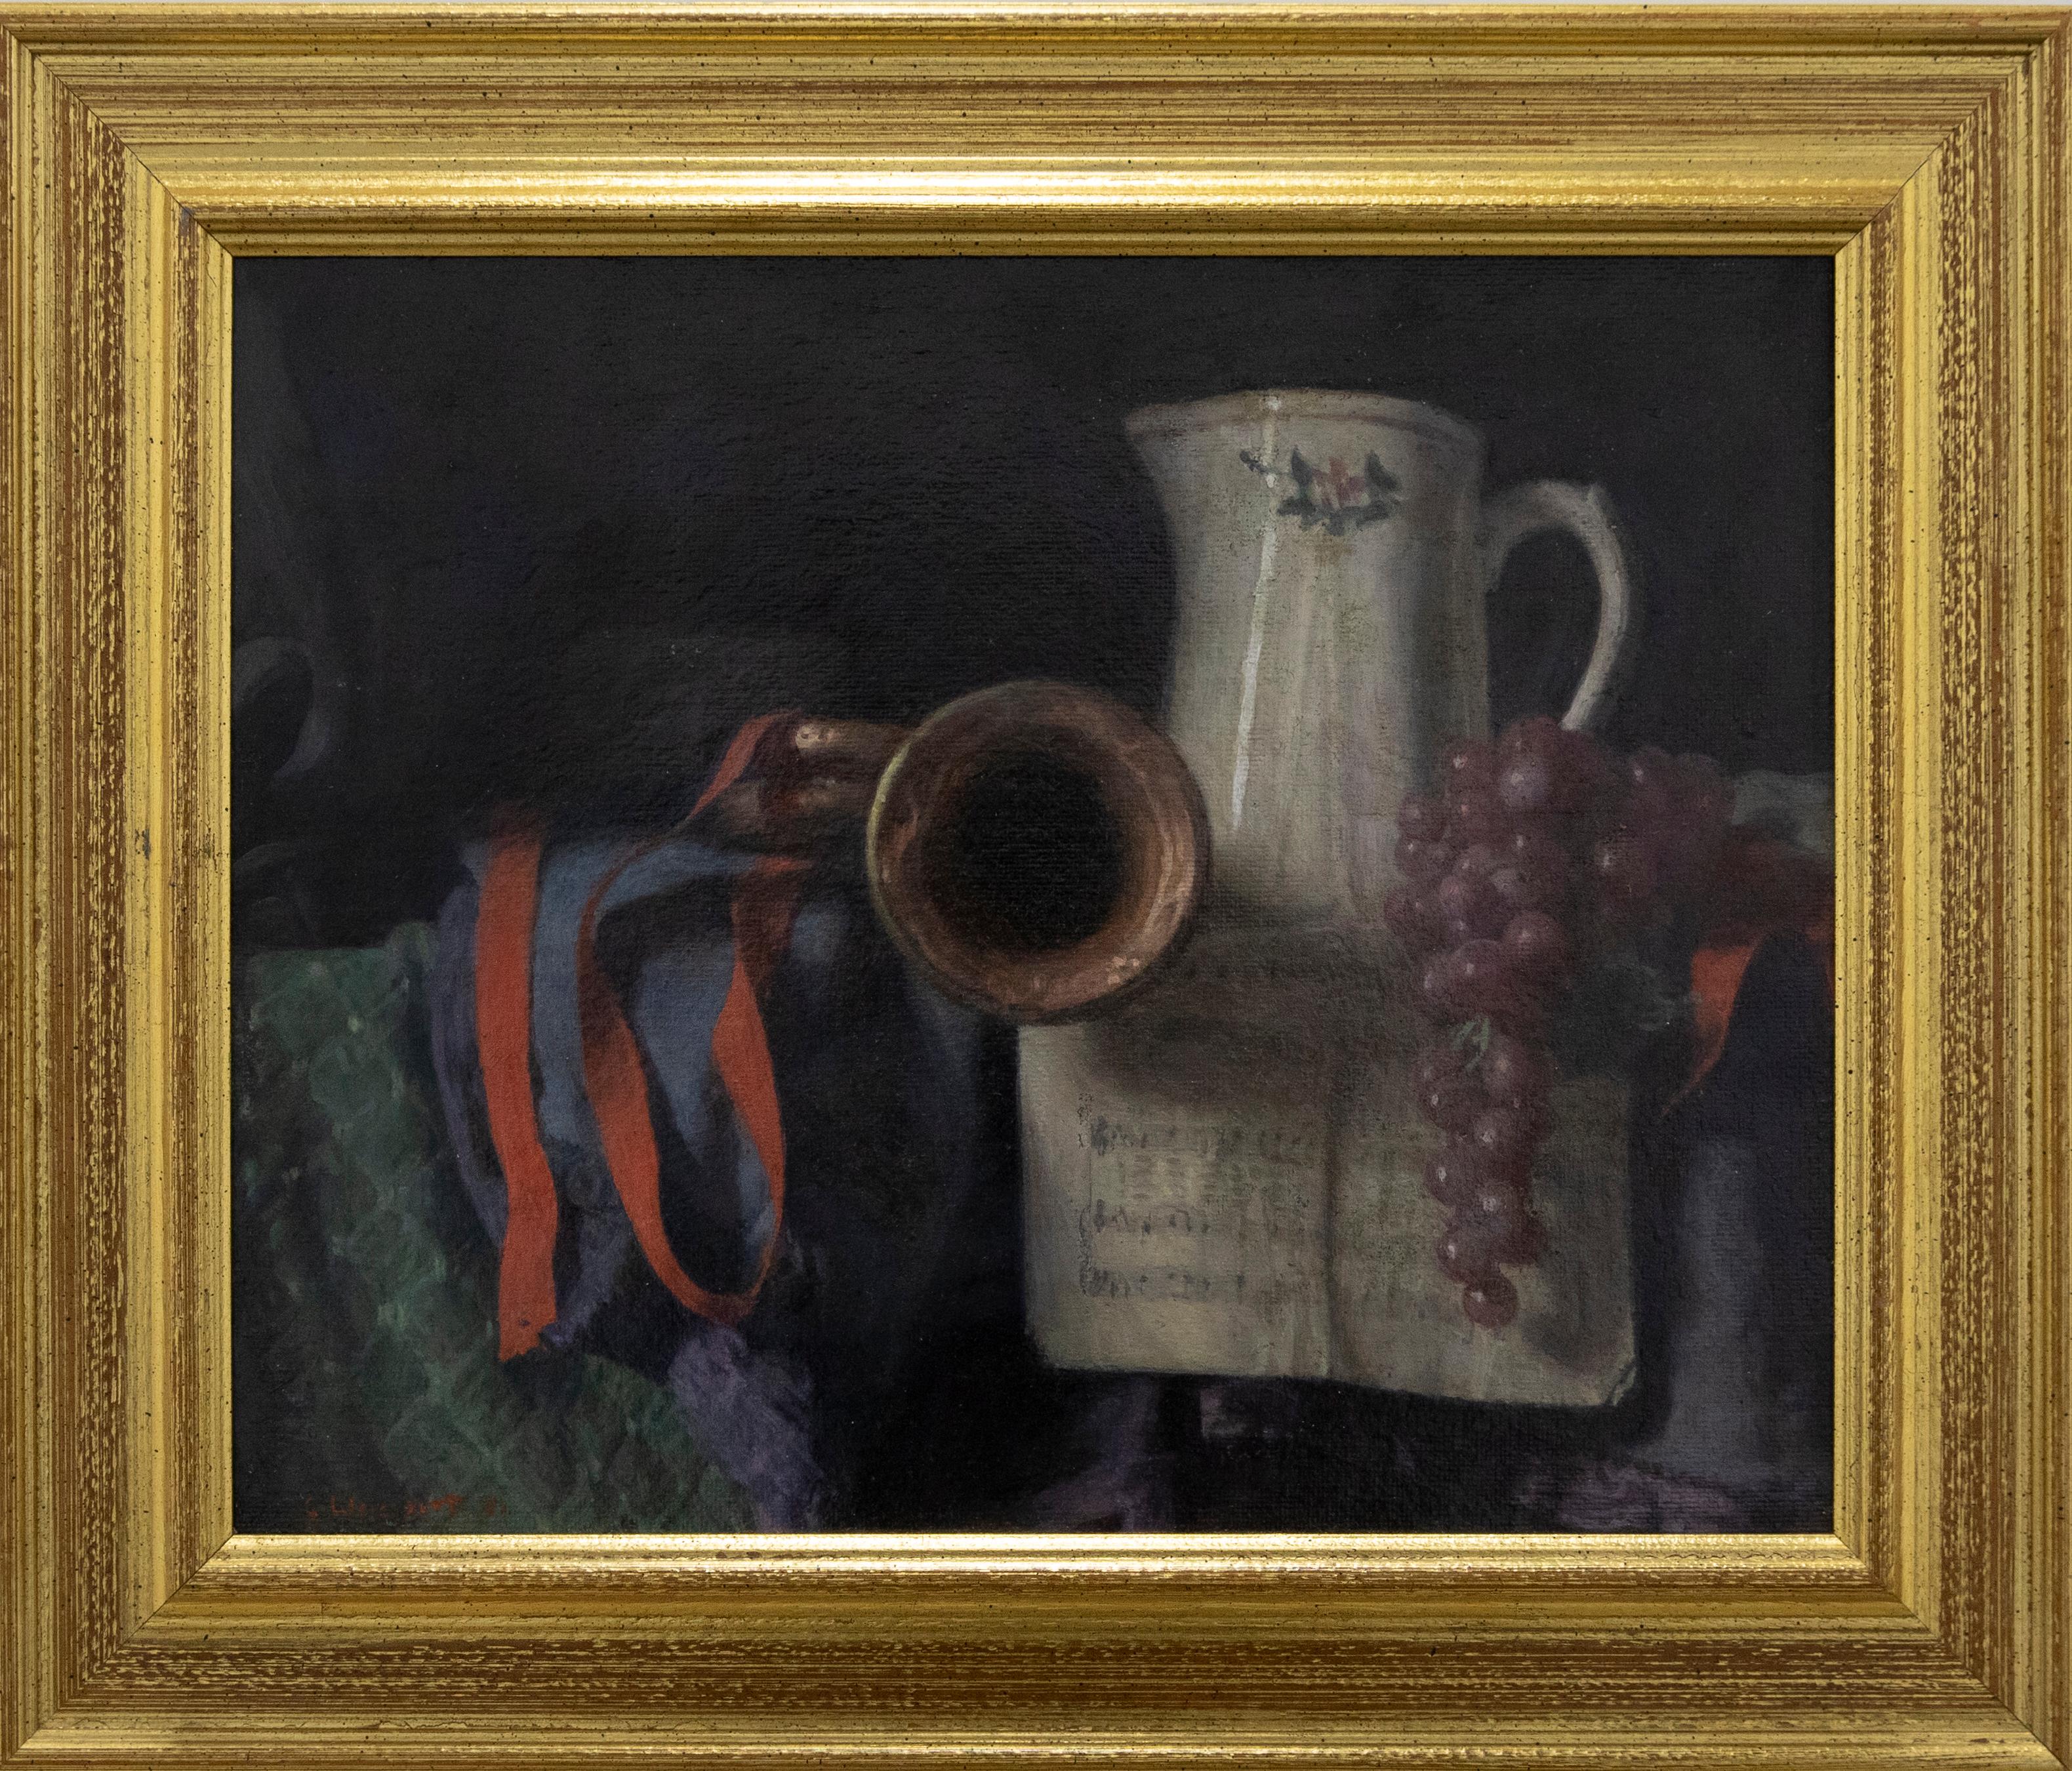 A delicate and finely executed 20th Century still life in oil, showing a composition of a French horn and sheet music arranged with draped grapes, a ceramic jug and a vibrant red ribbon (a signature touch of many of Weissbort's still life